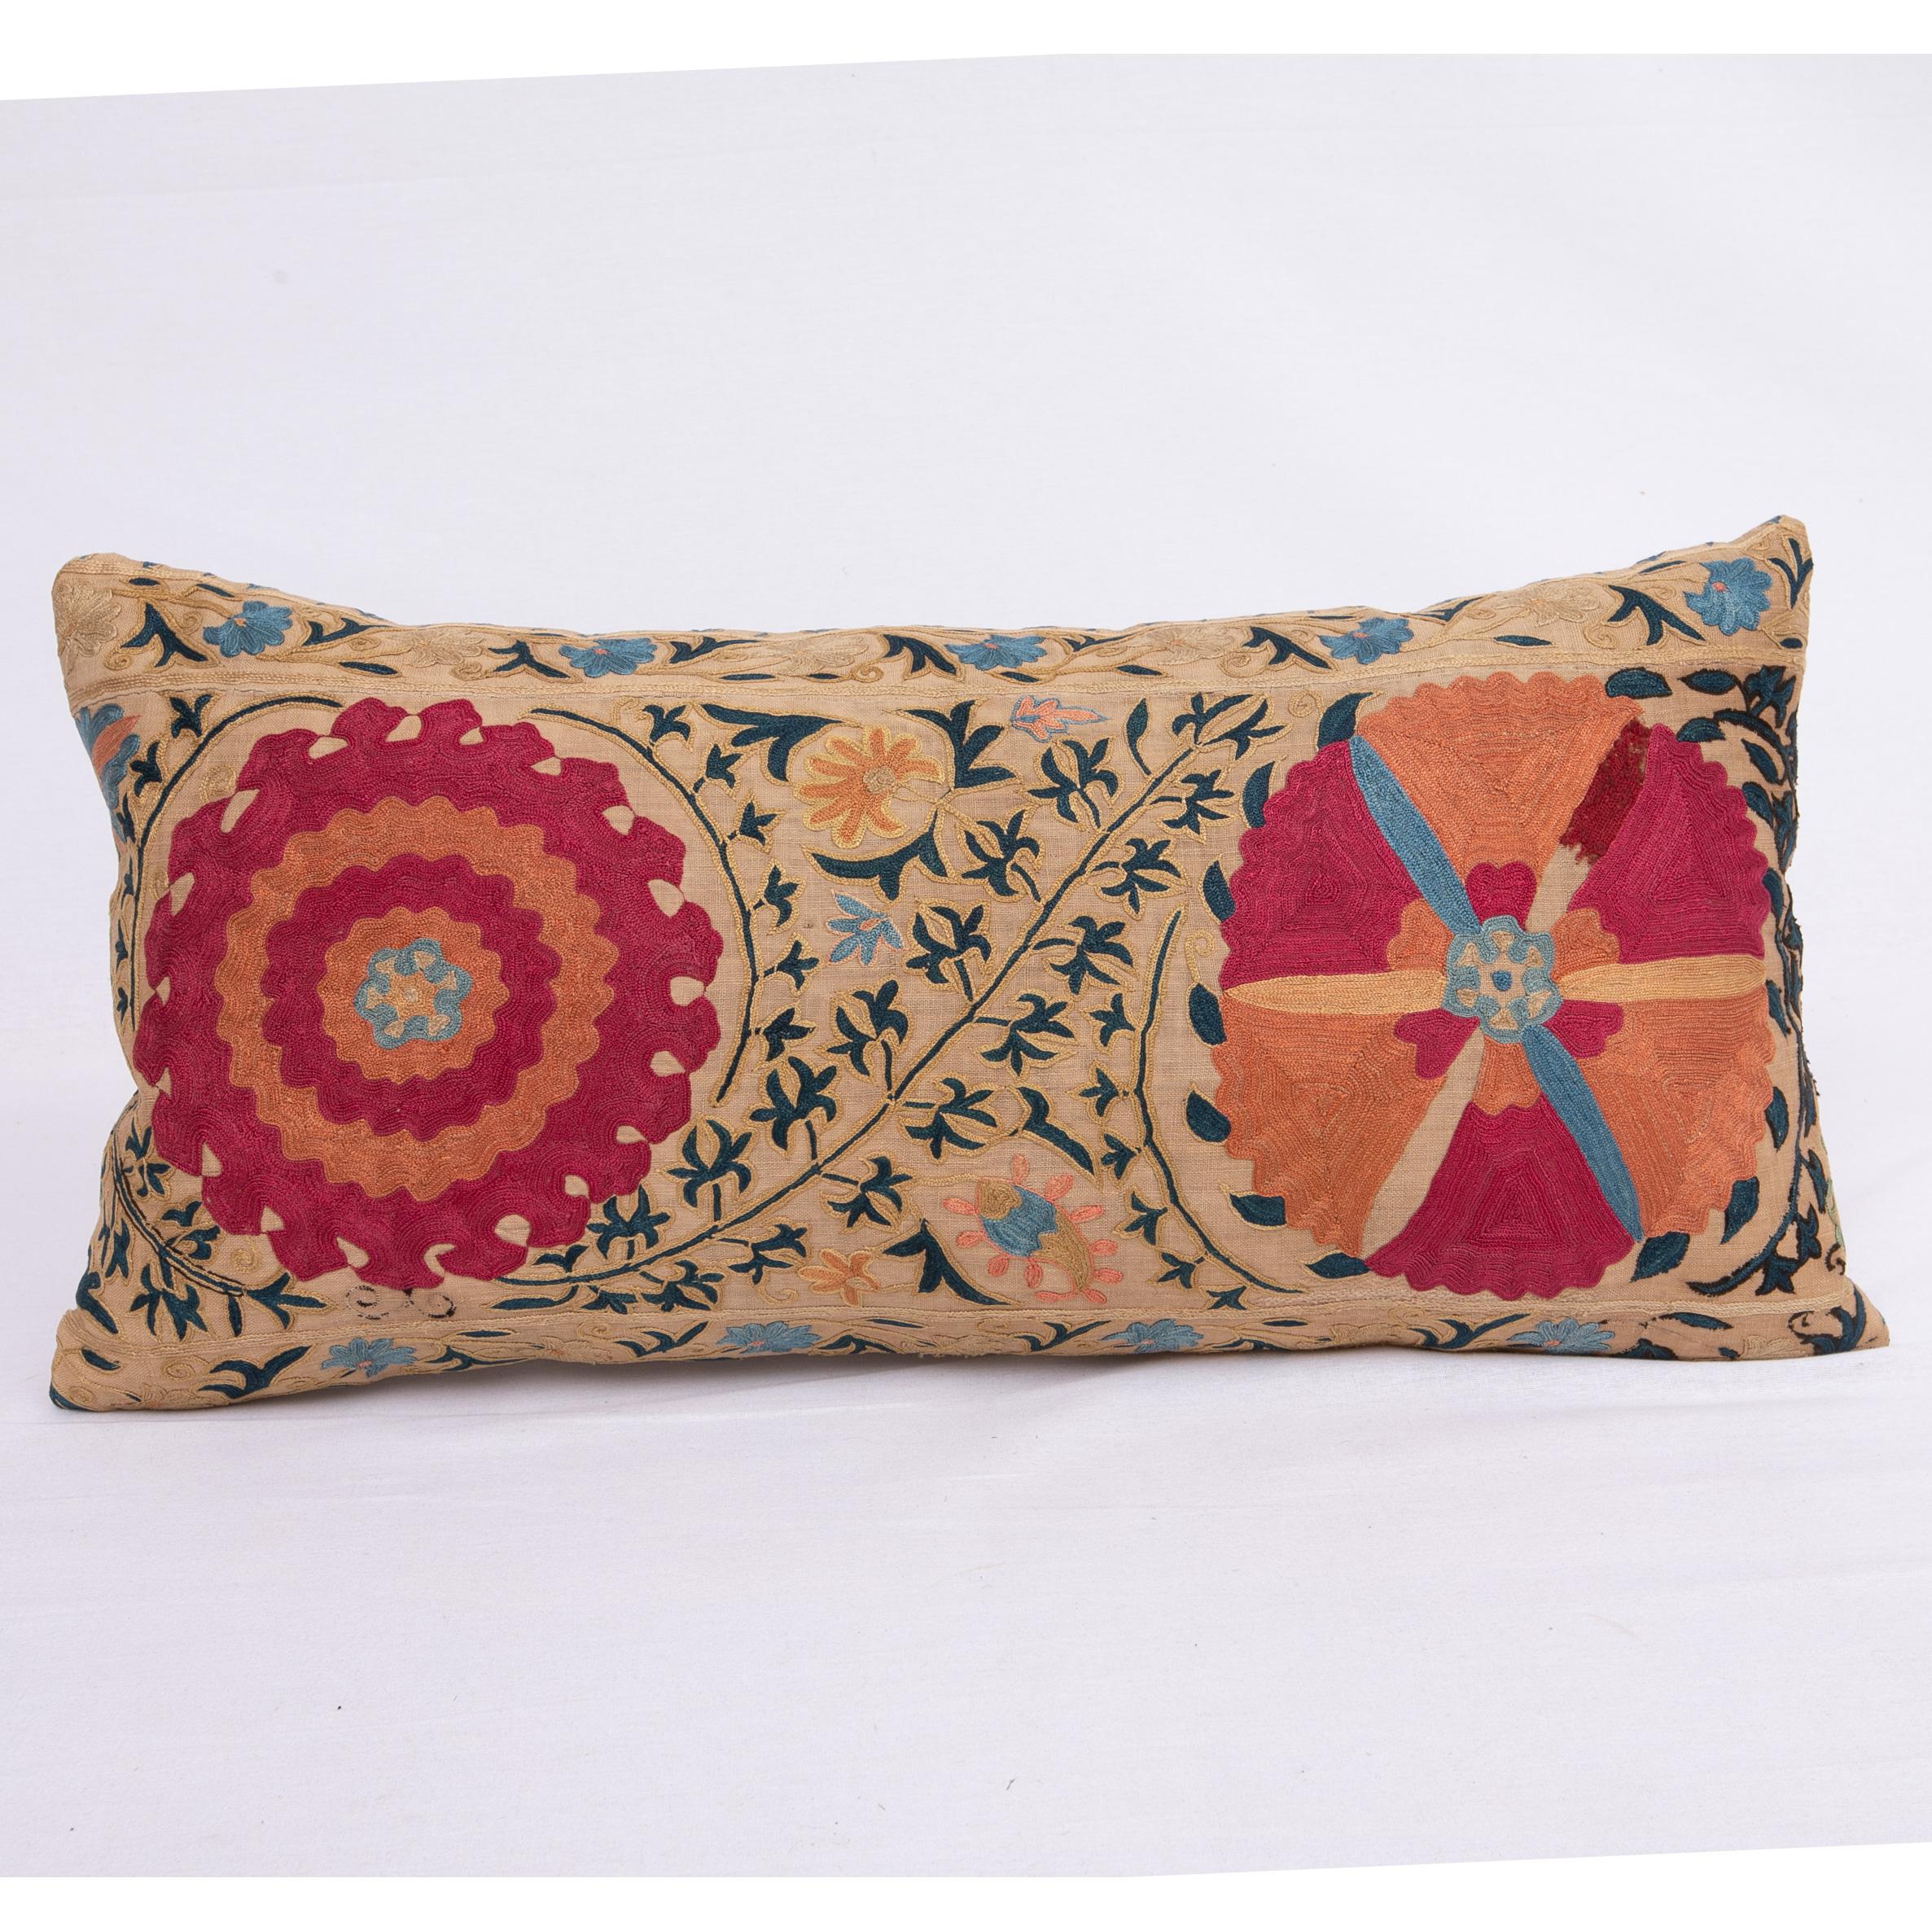 Antique Suzani Pillowcase / Cushion Cover Made from a Mid 19th c Suzani 1